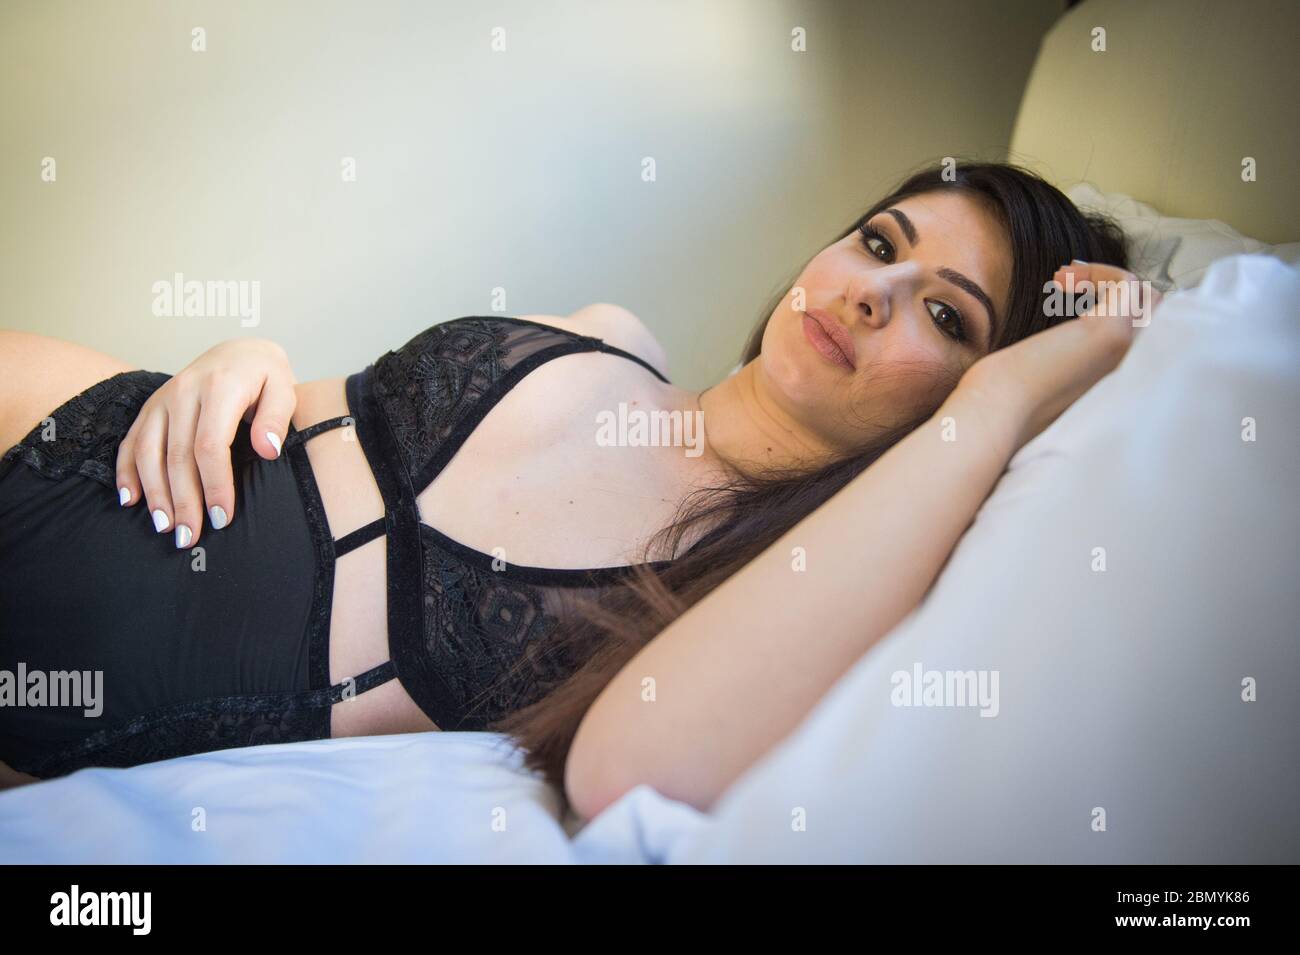 A young caucasian woman wearing lingerie at a boudoir location. Stock Photo